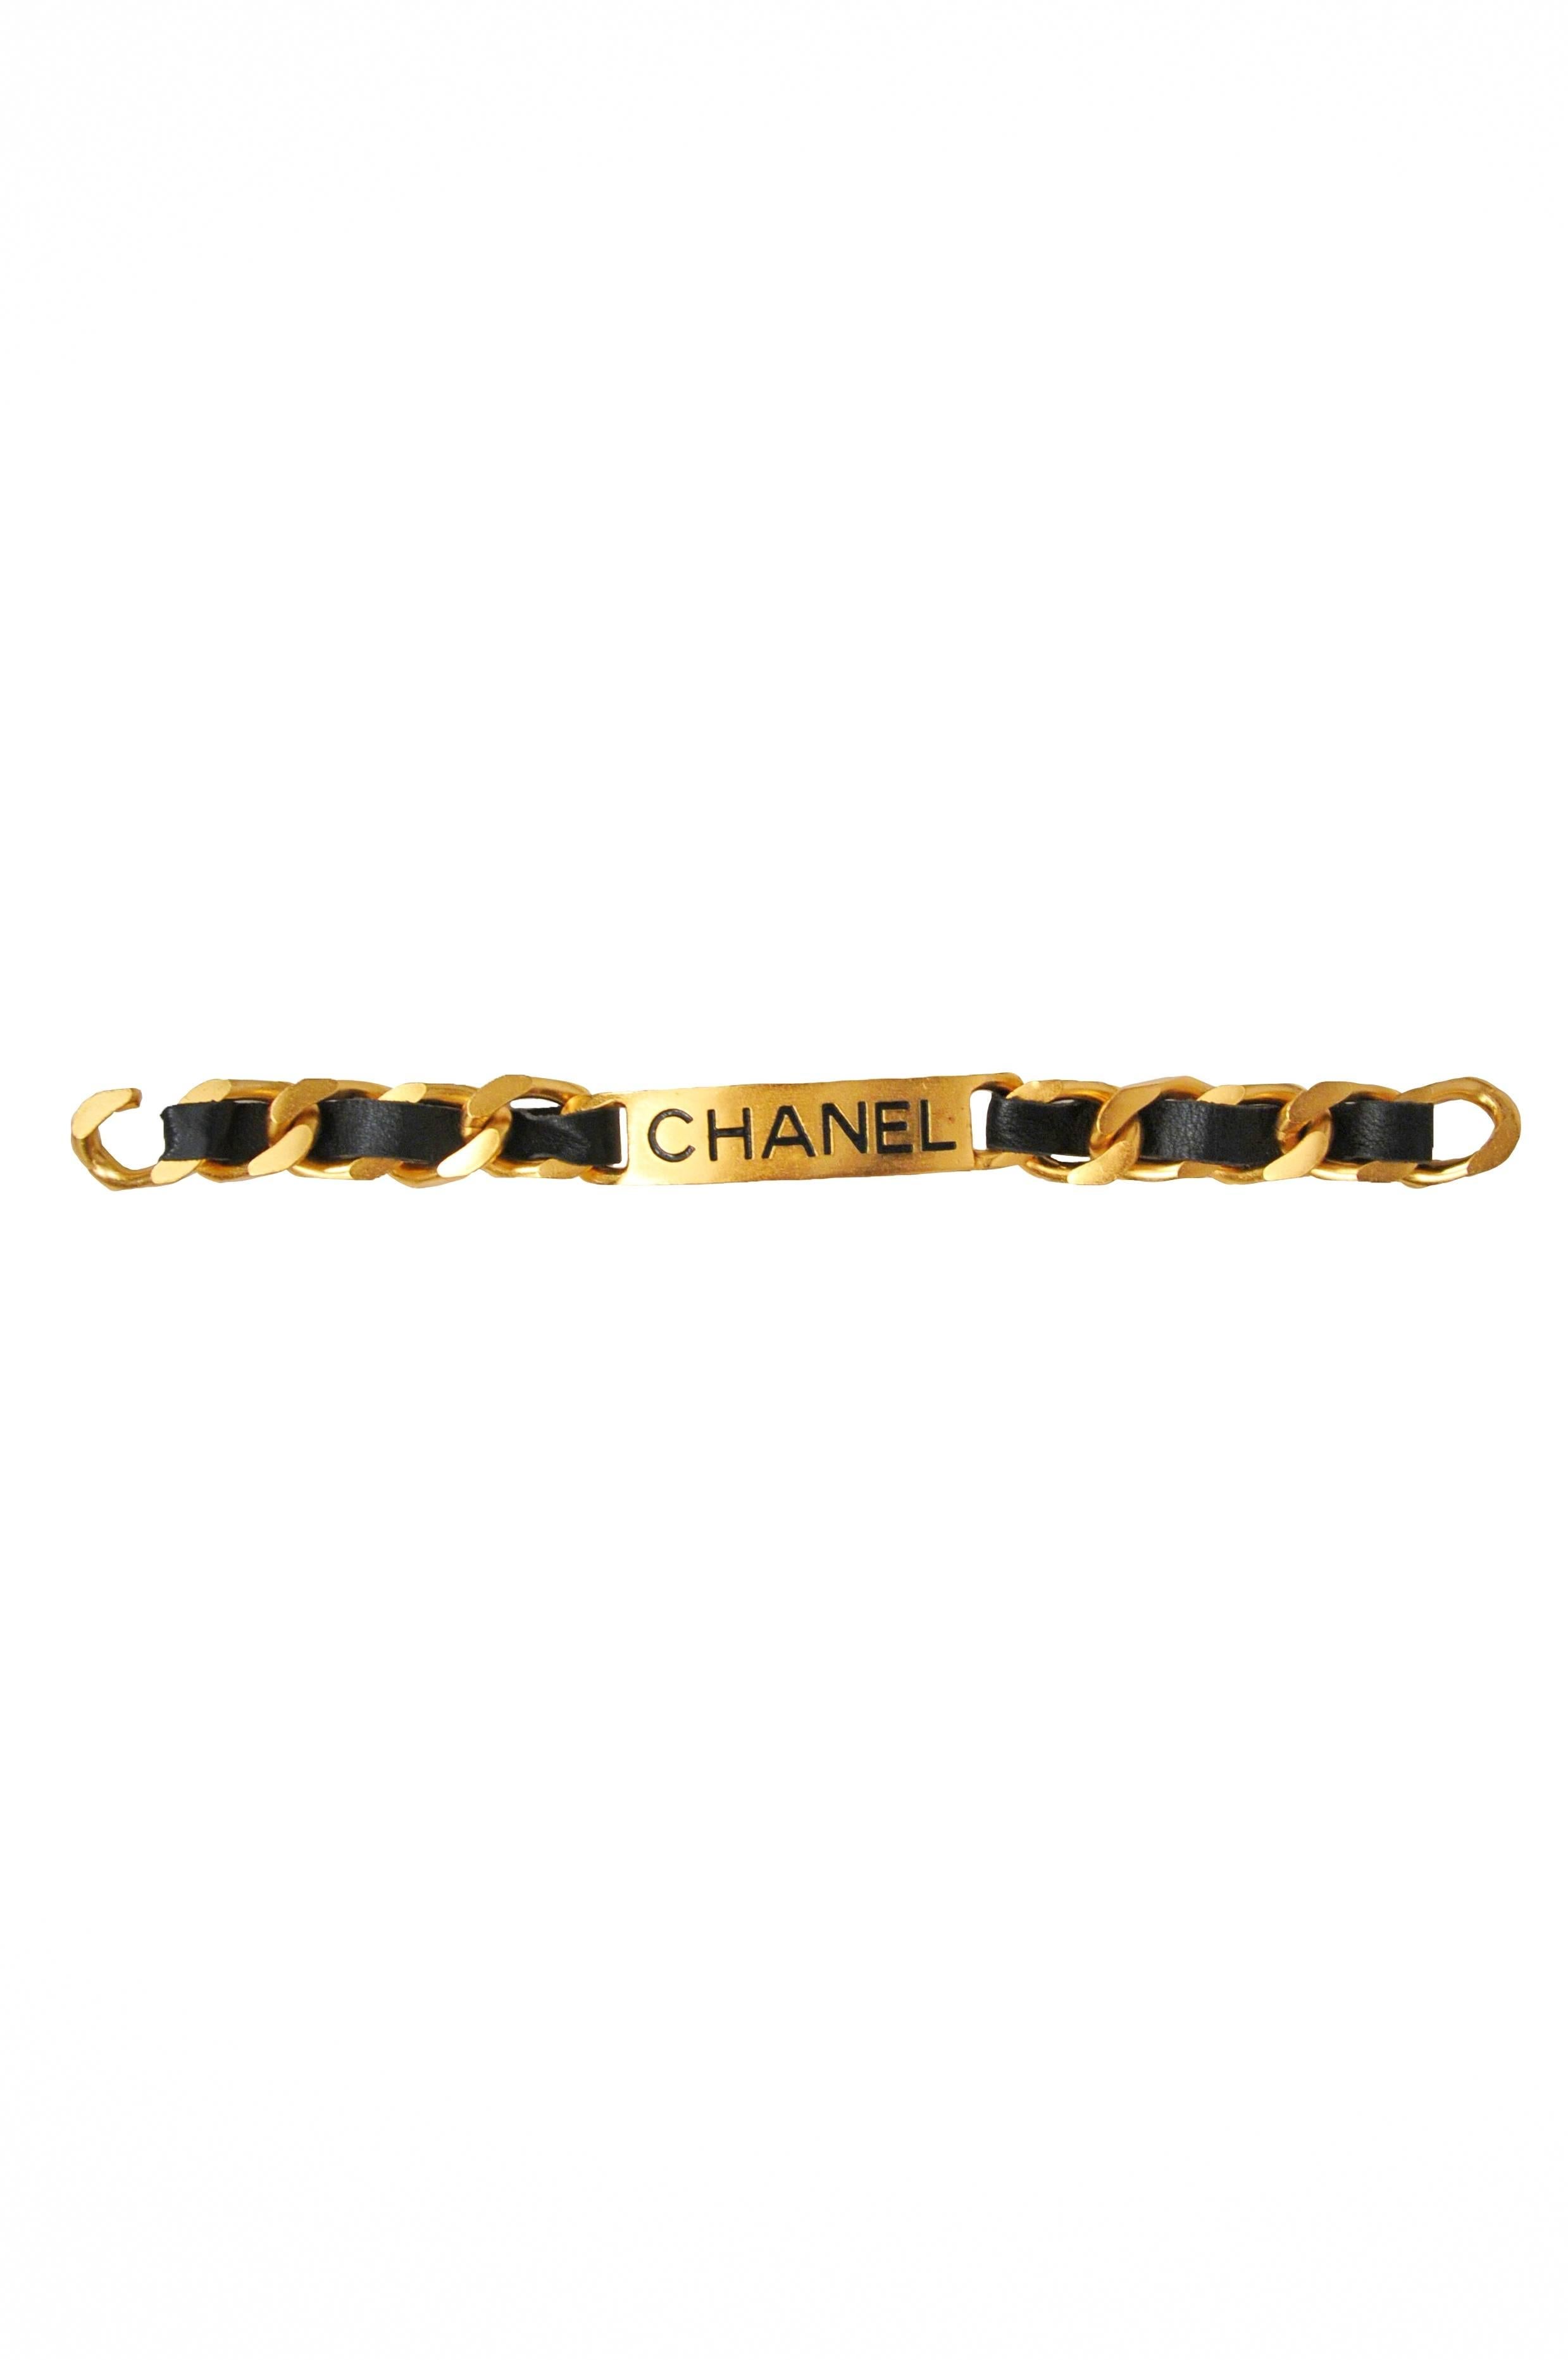 Vintage Chanel ID bracelet. Gold tone metal plate marked CHANEL. Heavy chain with black leather woven throughout. Stamped Chanel Made in France.